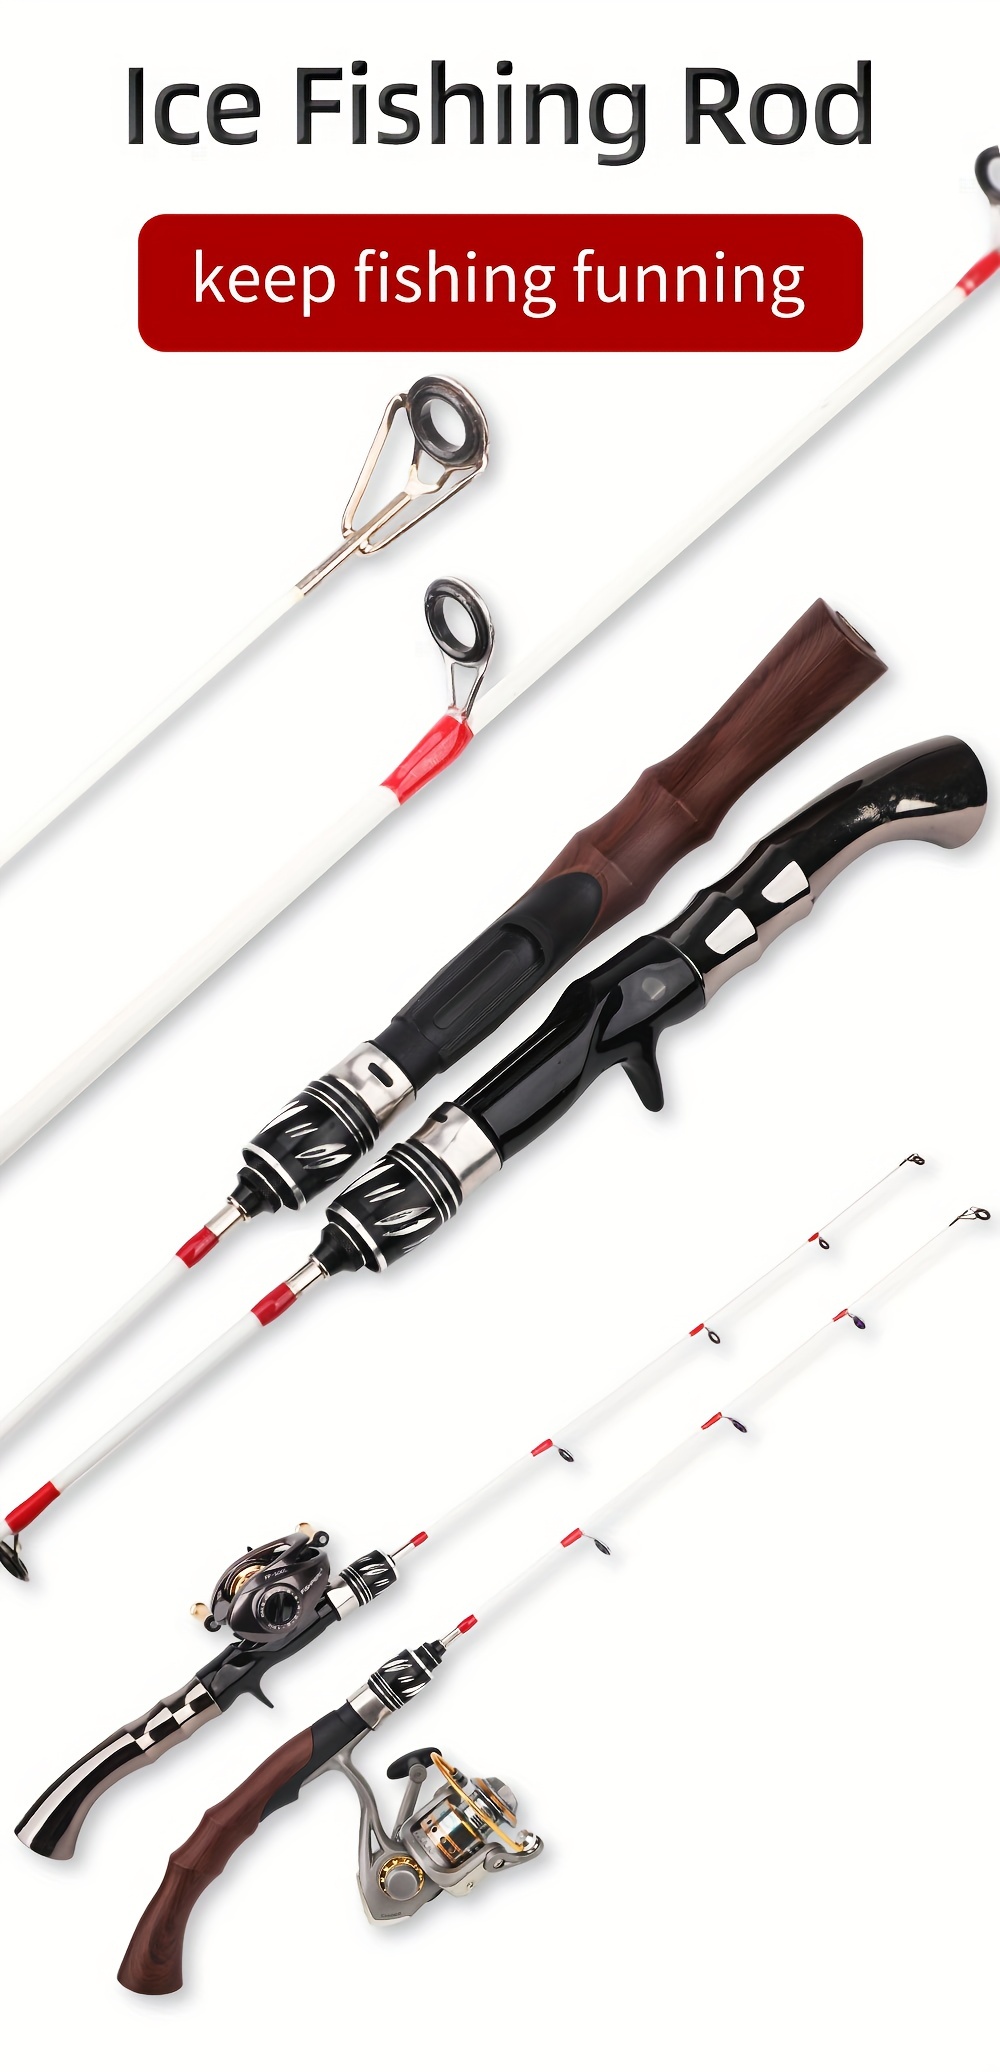 NEW 60cm 2 Tips Rod Reel Combos Winter Ice Fishing Rod Fishing Reel set Rod  Pole Tackle Carbon pole Ice fishing rod with reel